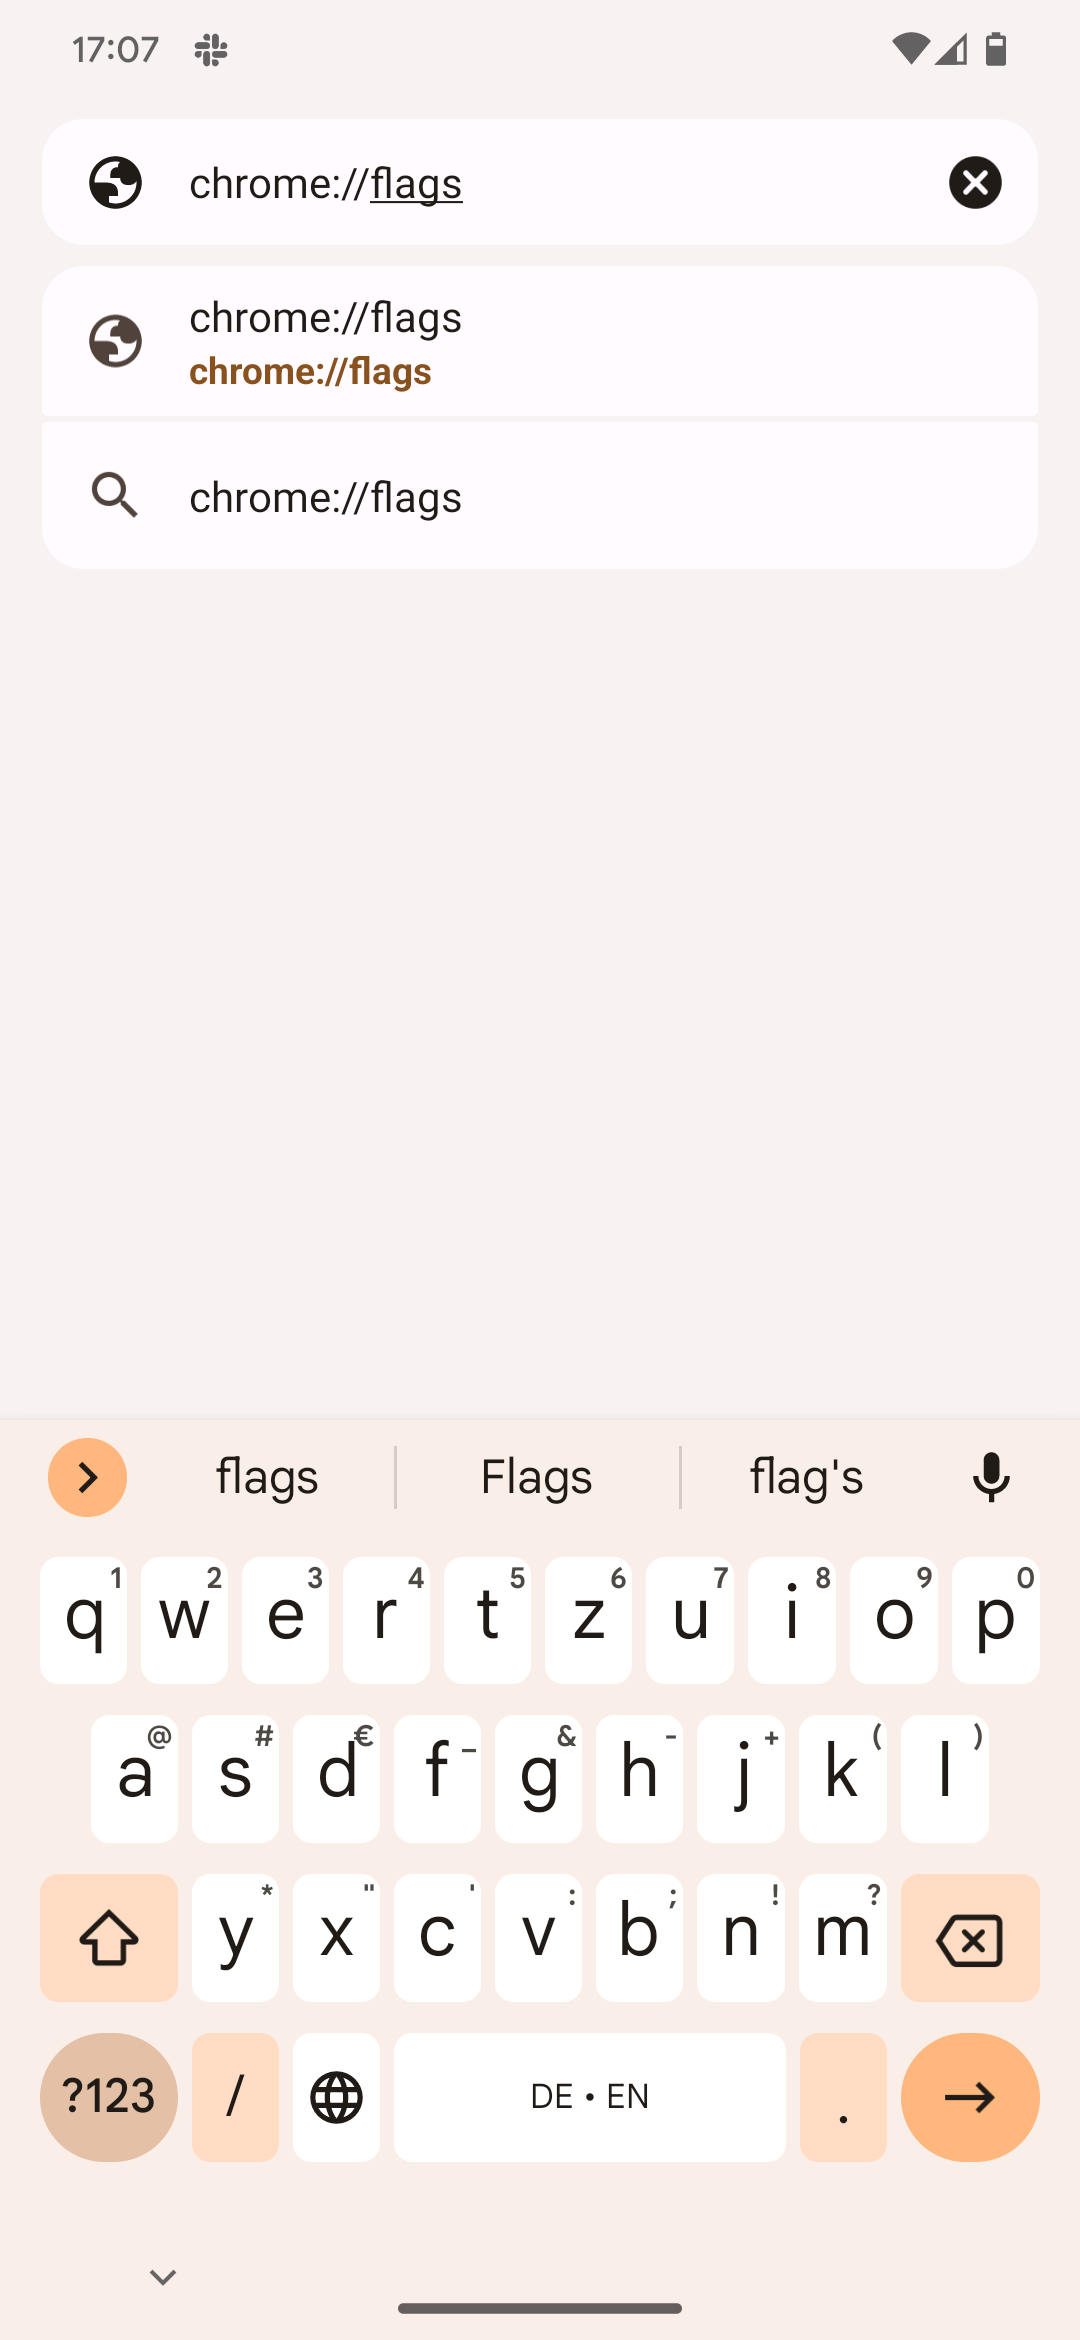 Opening Chrome flags on mobile